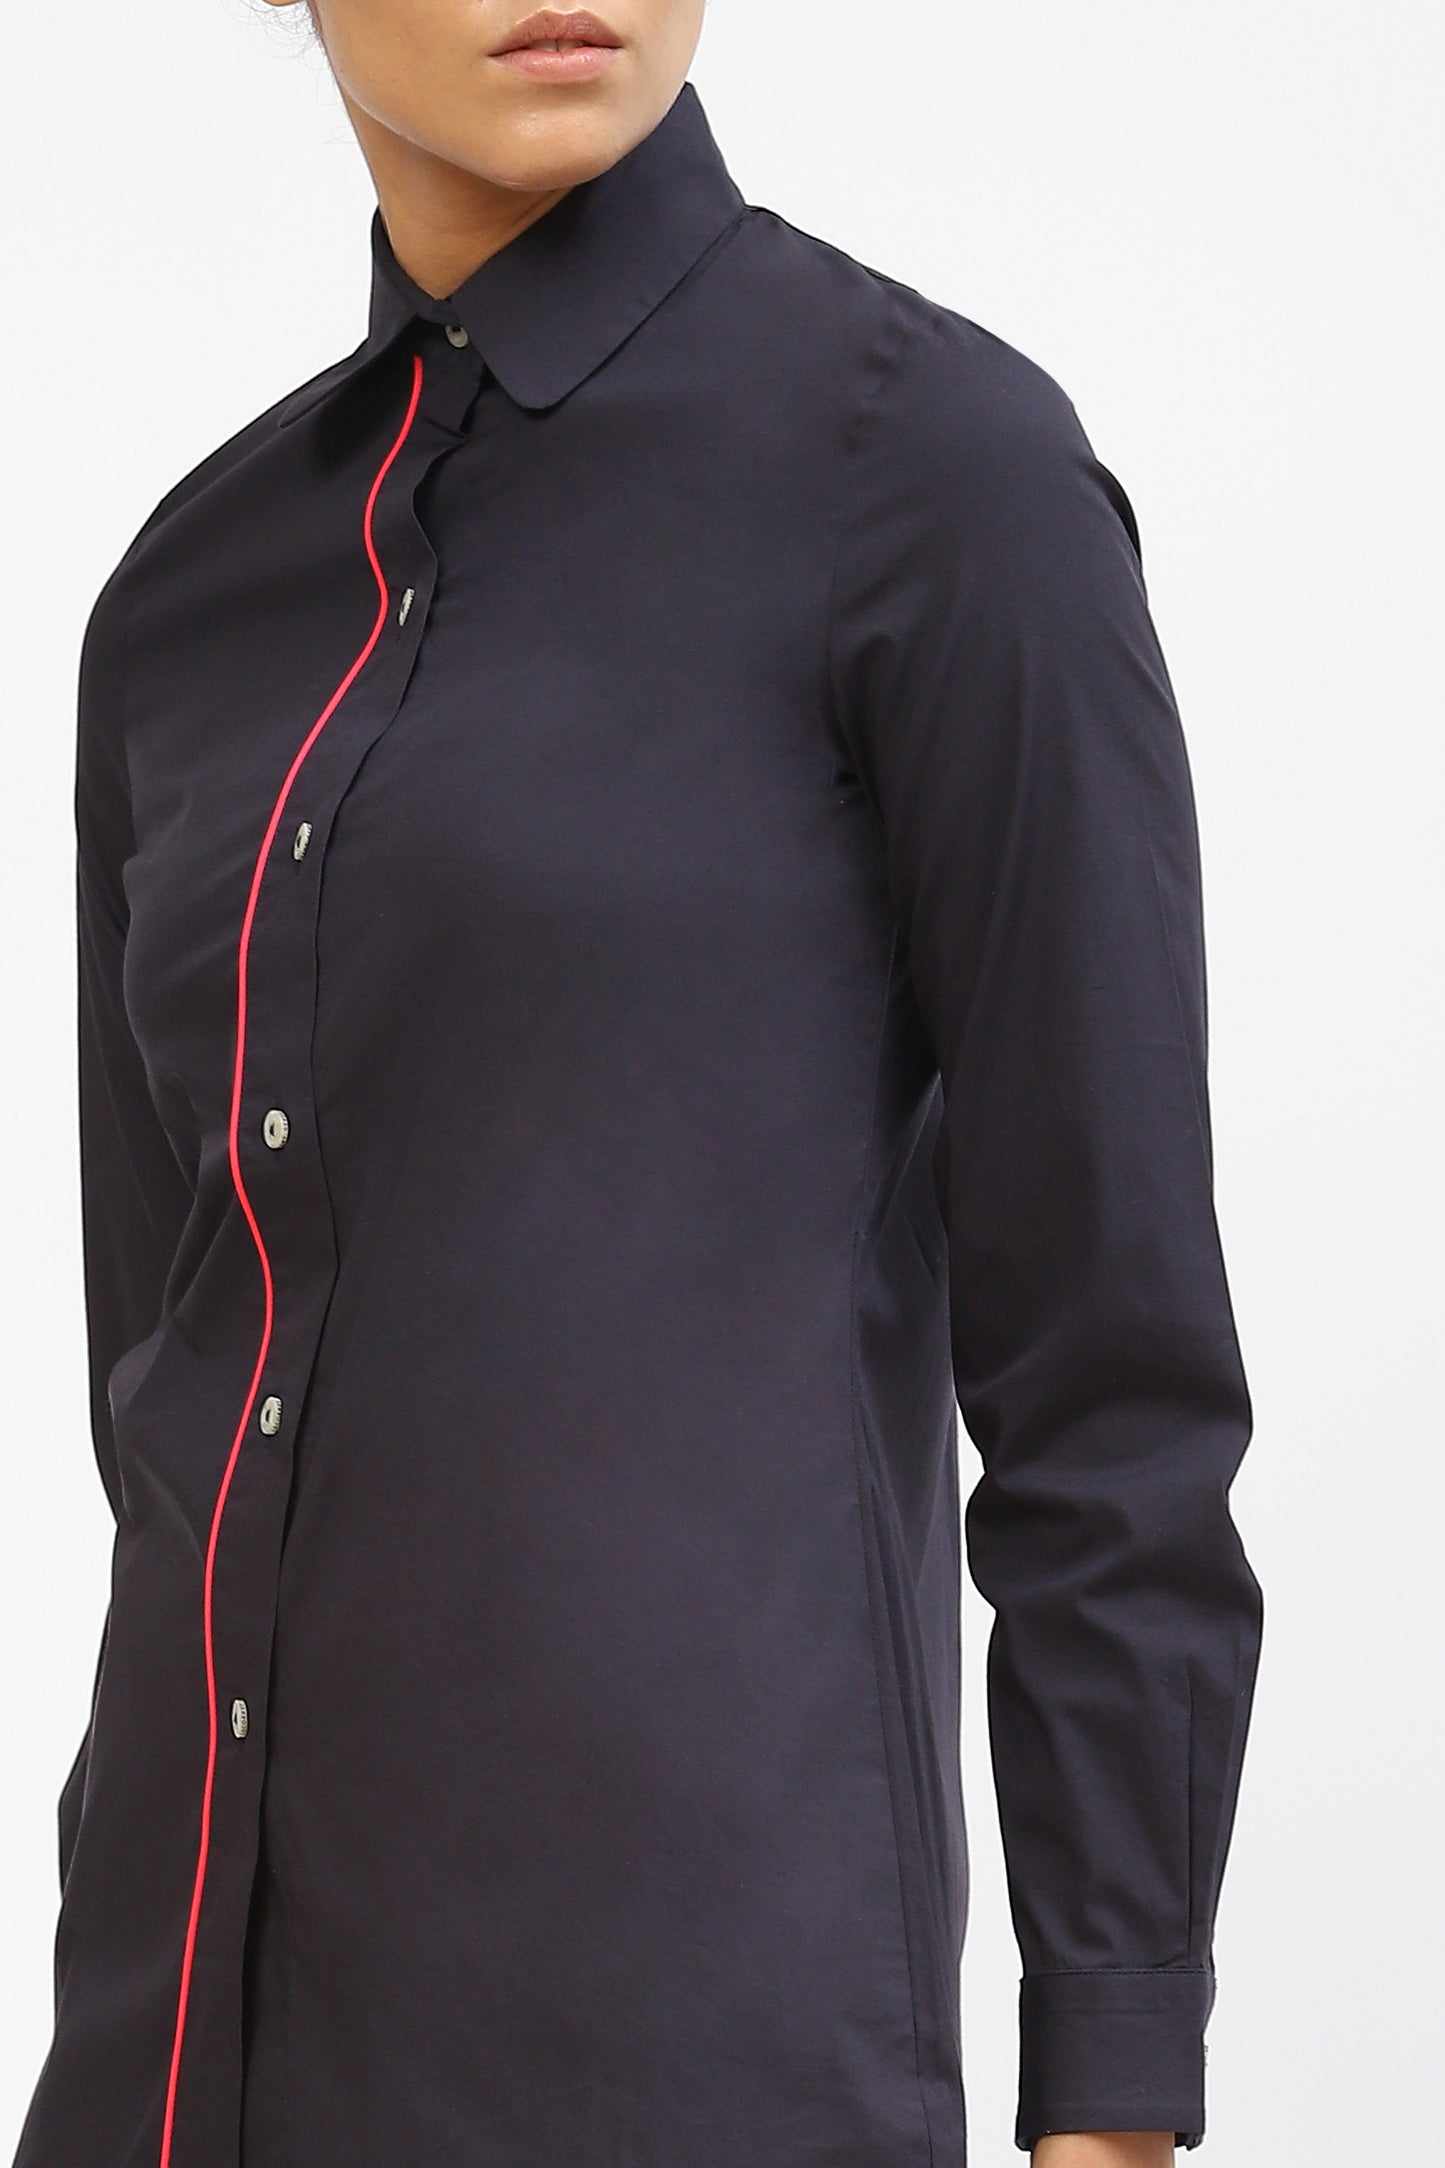 Womens Shirt With Contrast Piping